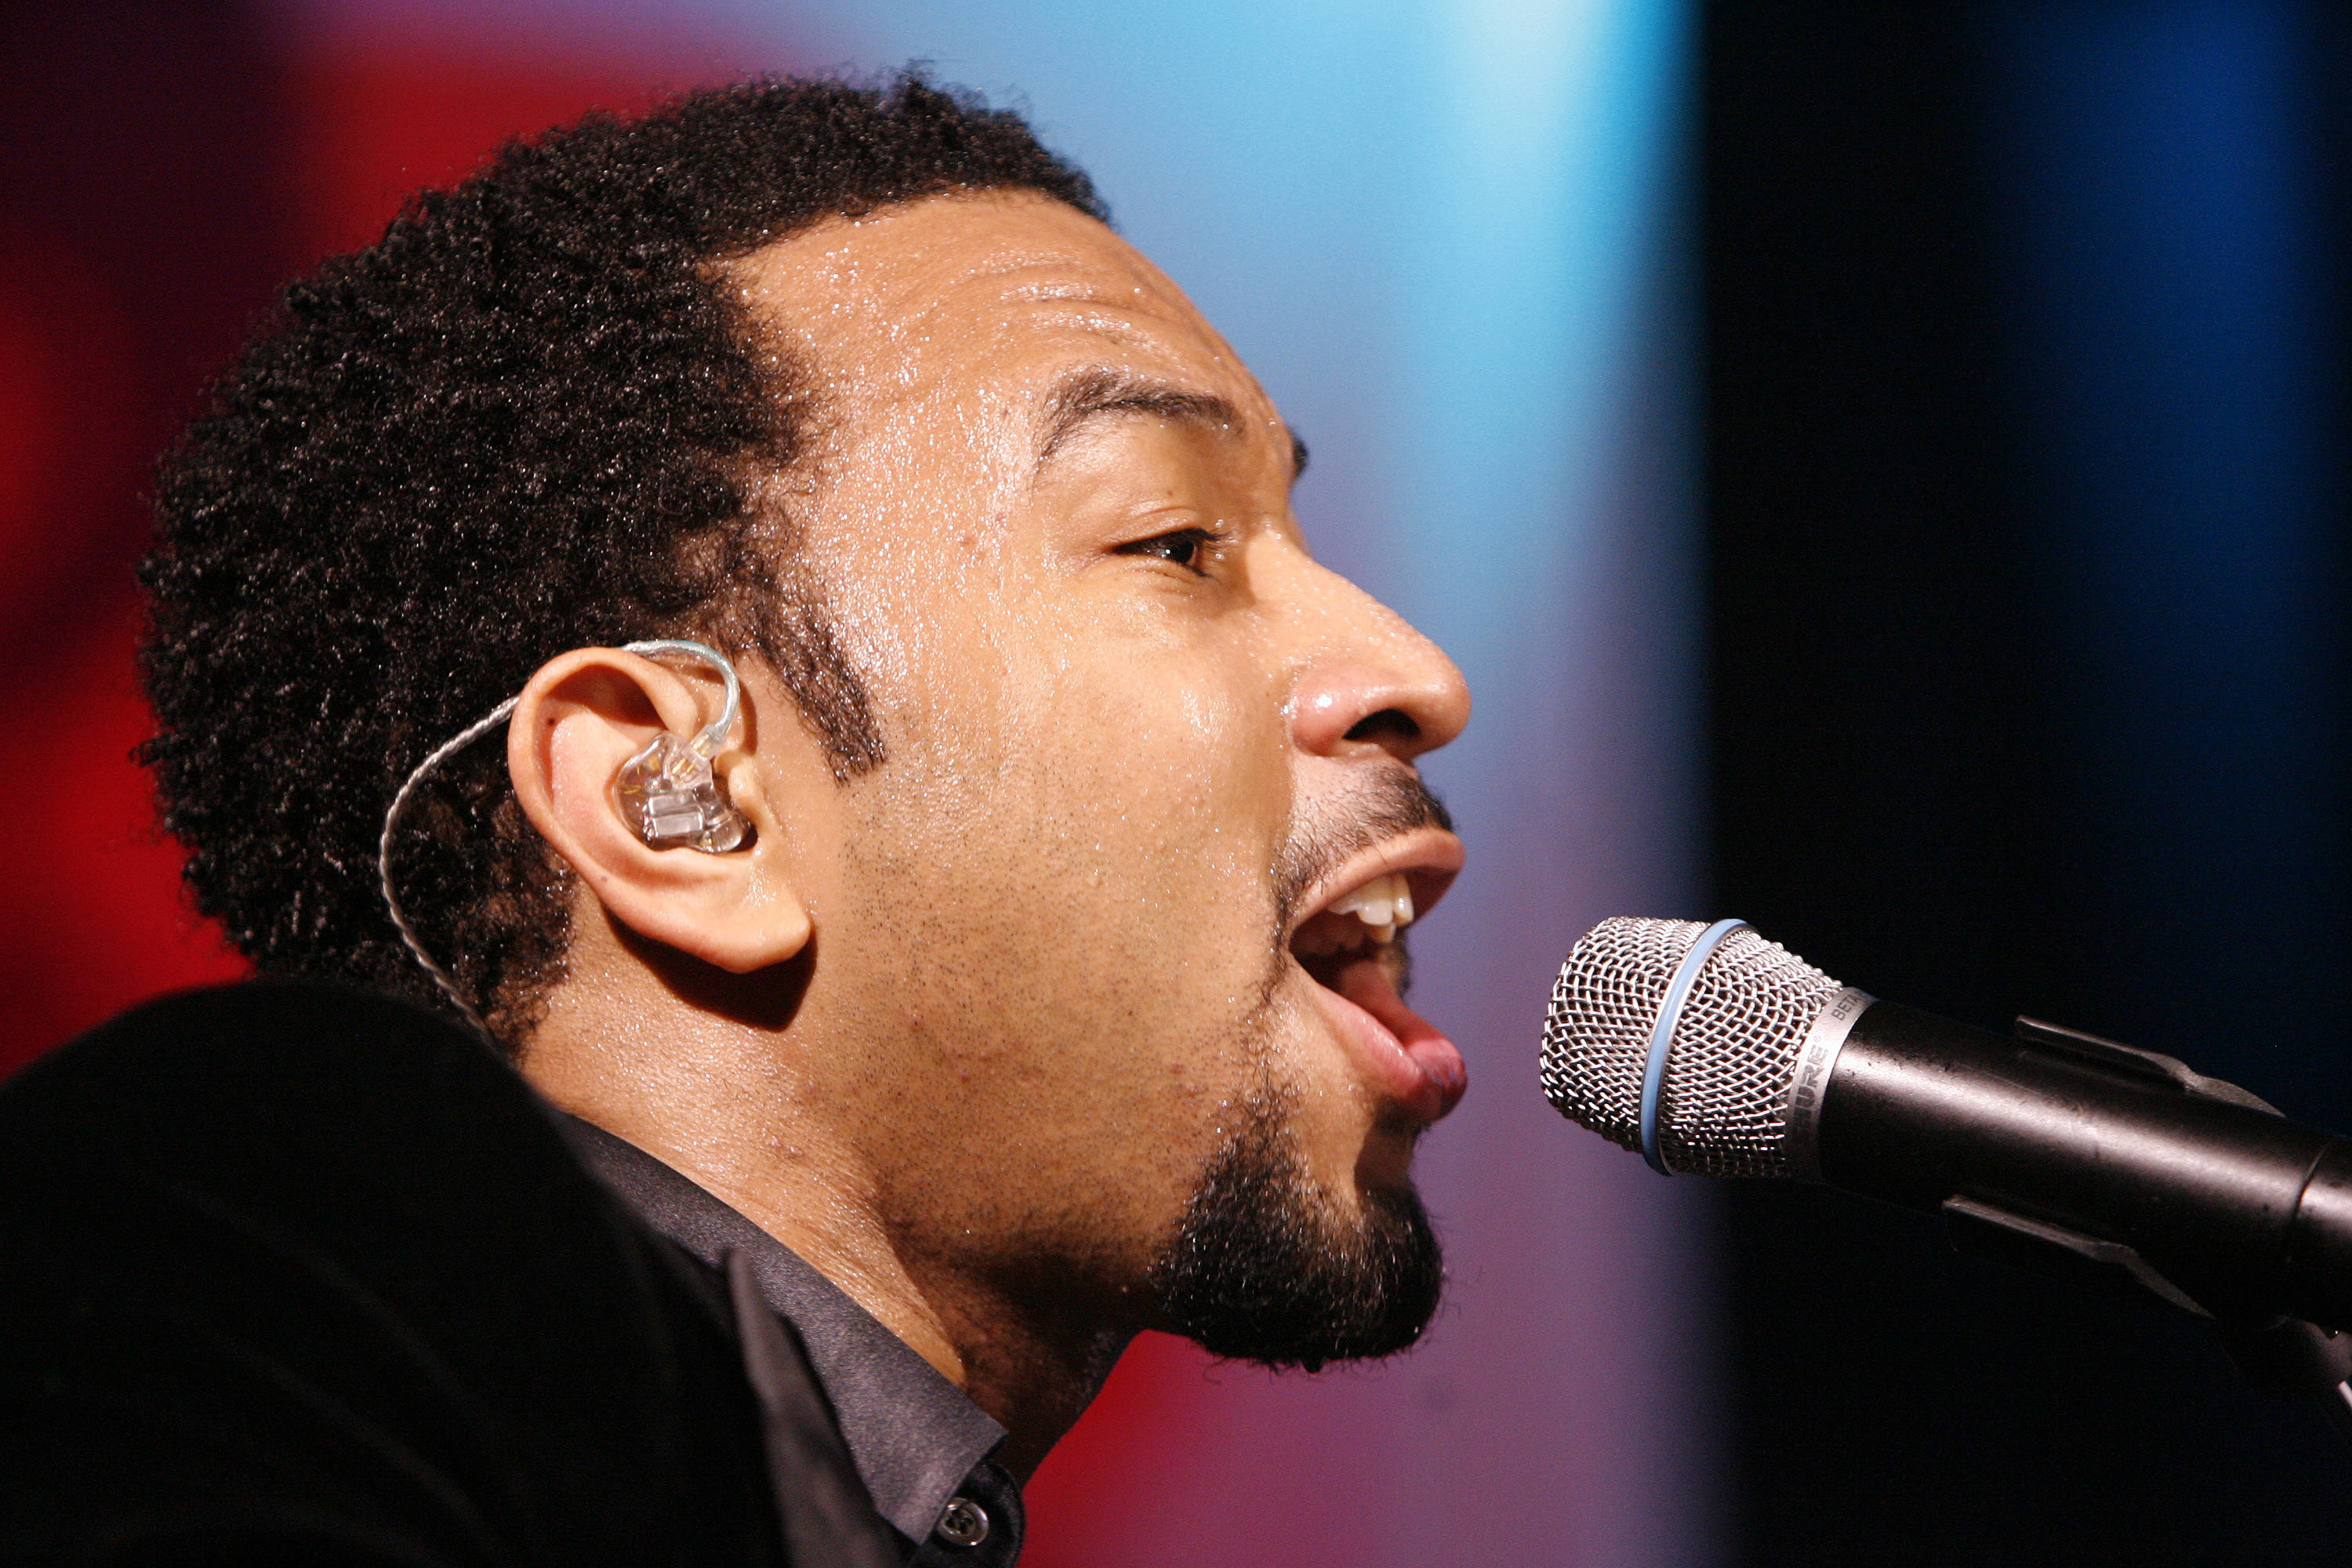 John Legend performing at the House of Blues in 2006, in Los Angeles, California. | Source: Getty Images